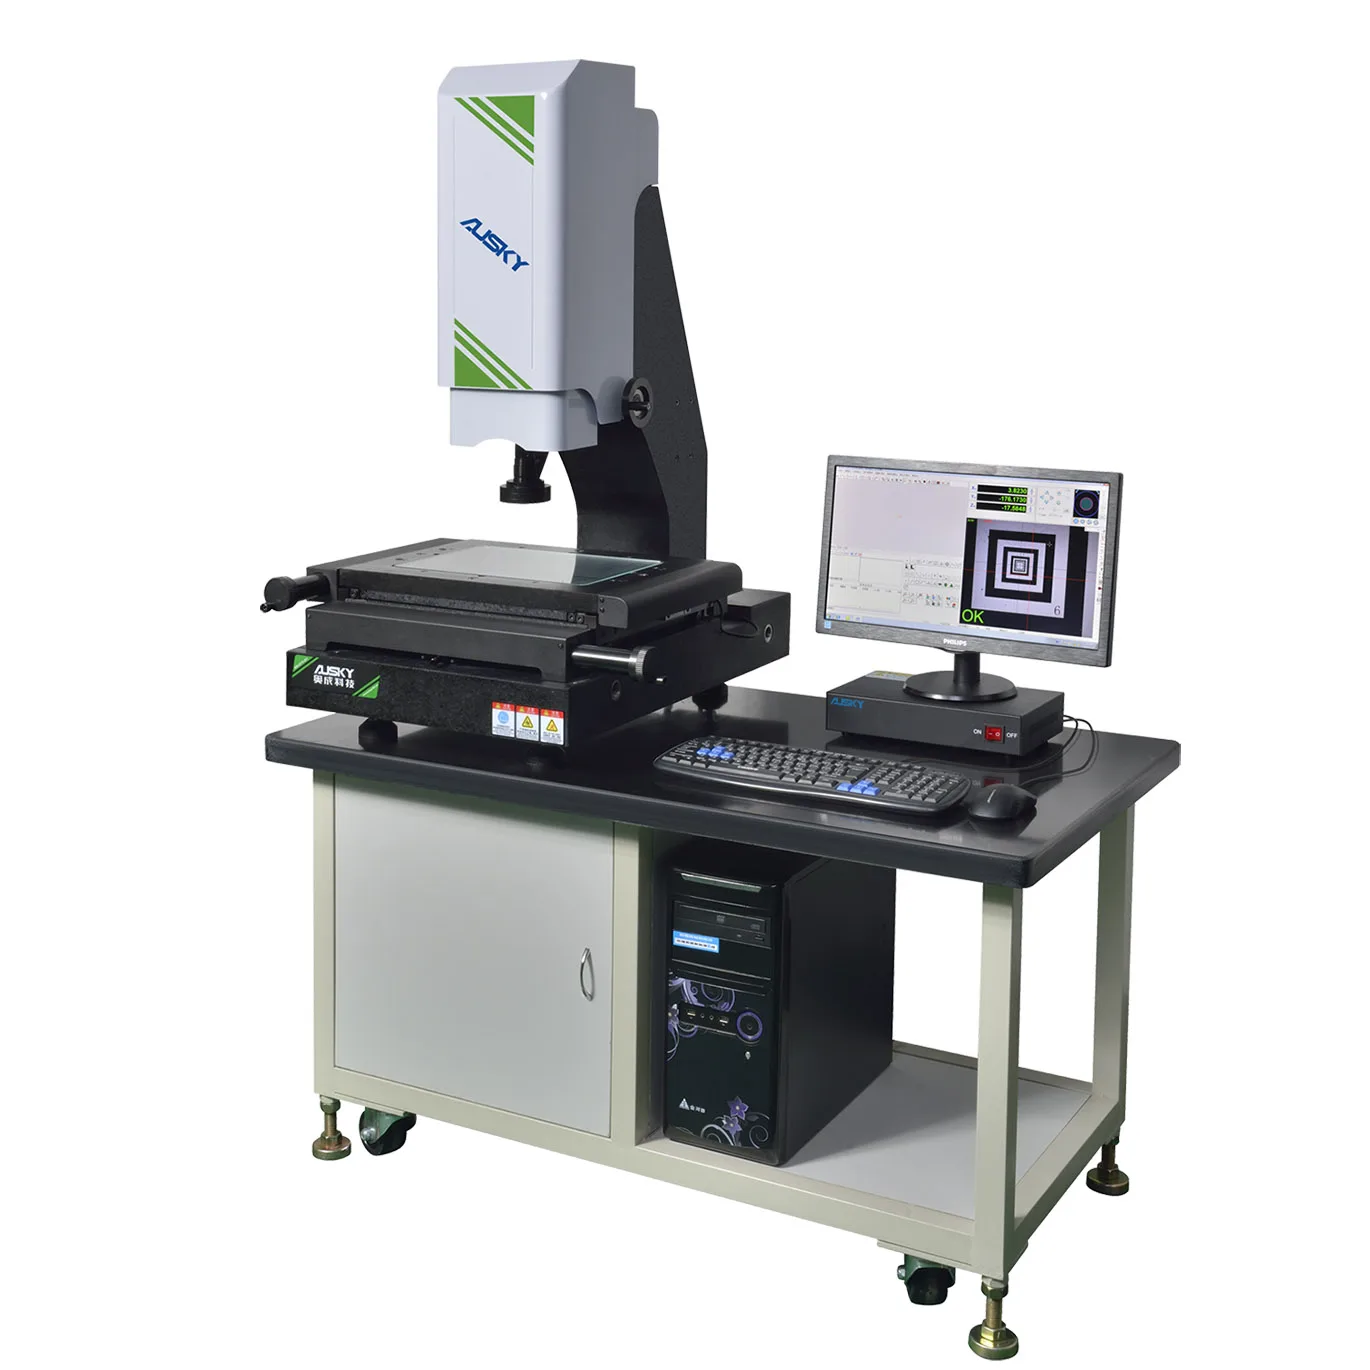 

High Accuracy 2.5D Optical Image Vision Measuring Machine for Coordinate Measurement